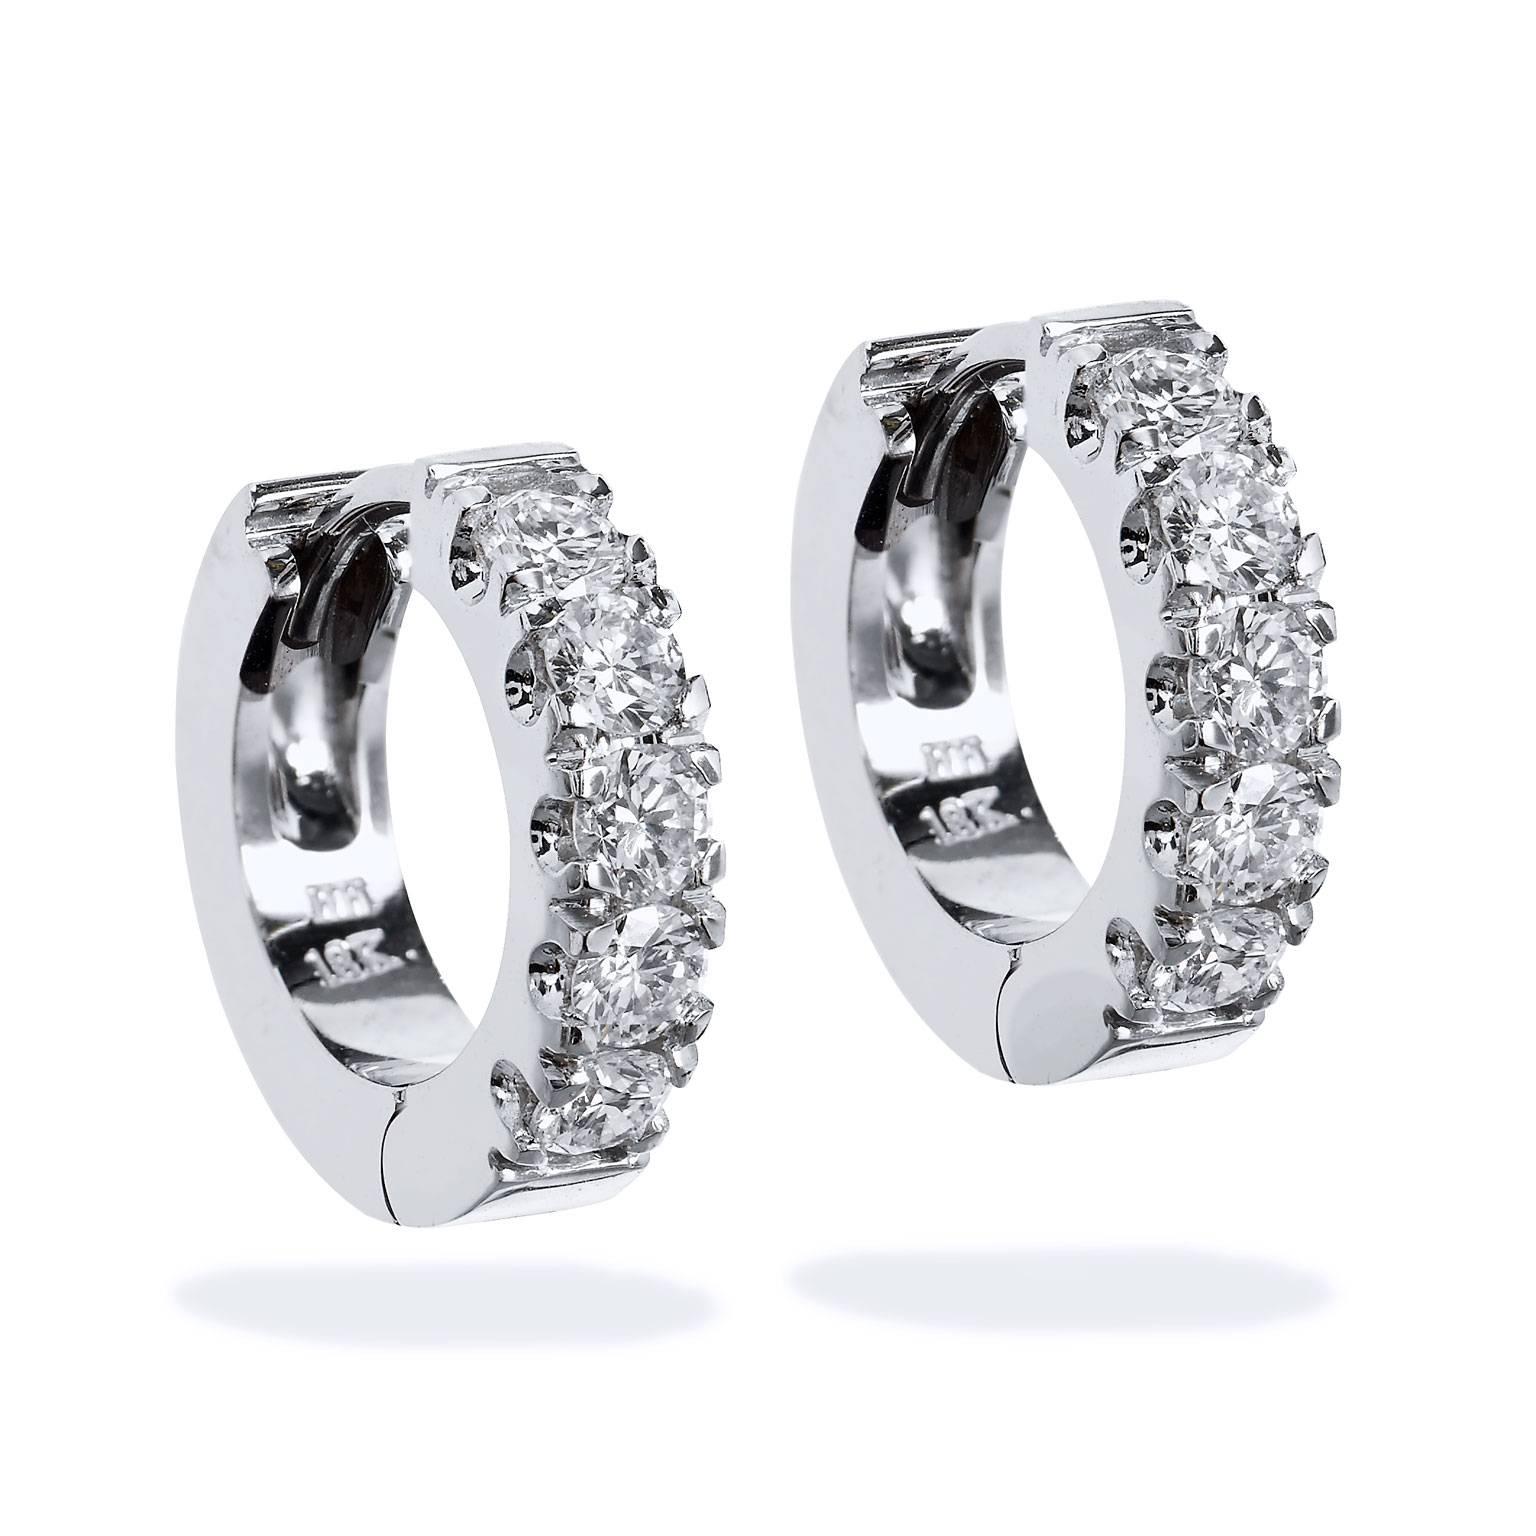 Mesmerizing in appearance, these handcrafted, H and H original 18 karat white gold huggie style hoop earrings feature 1.07 carat of diamond (H/VS2) in scalloped, shared prong setting- captivating from every angle.